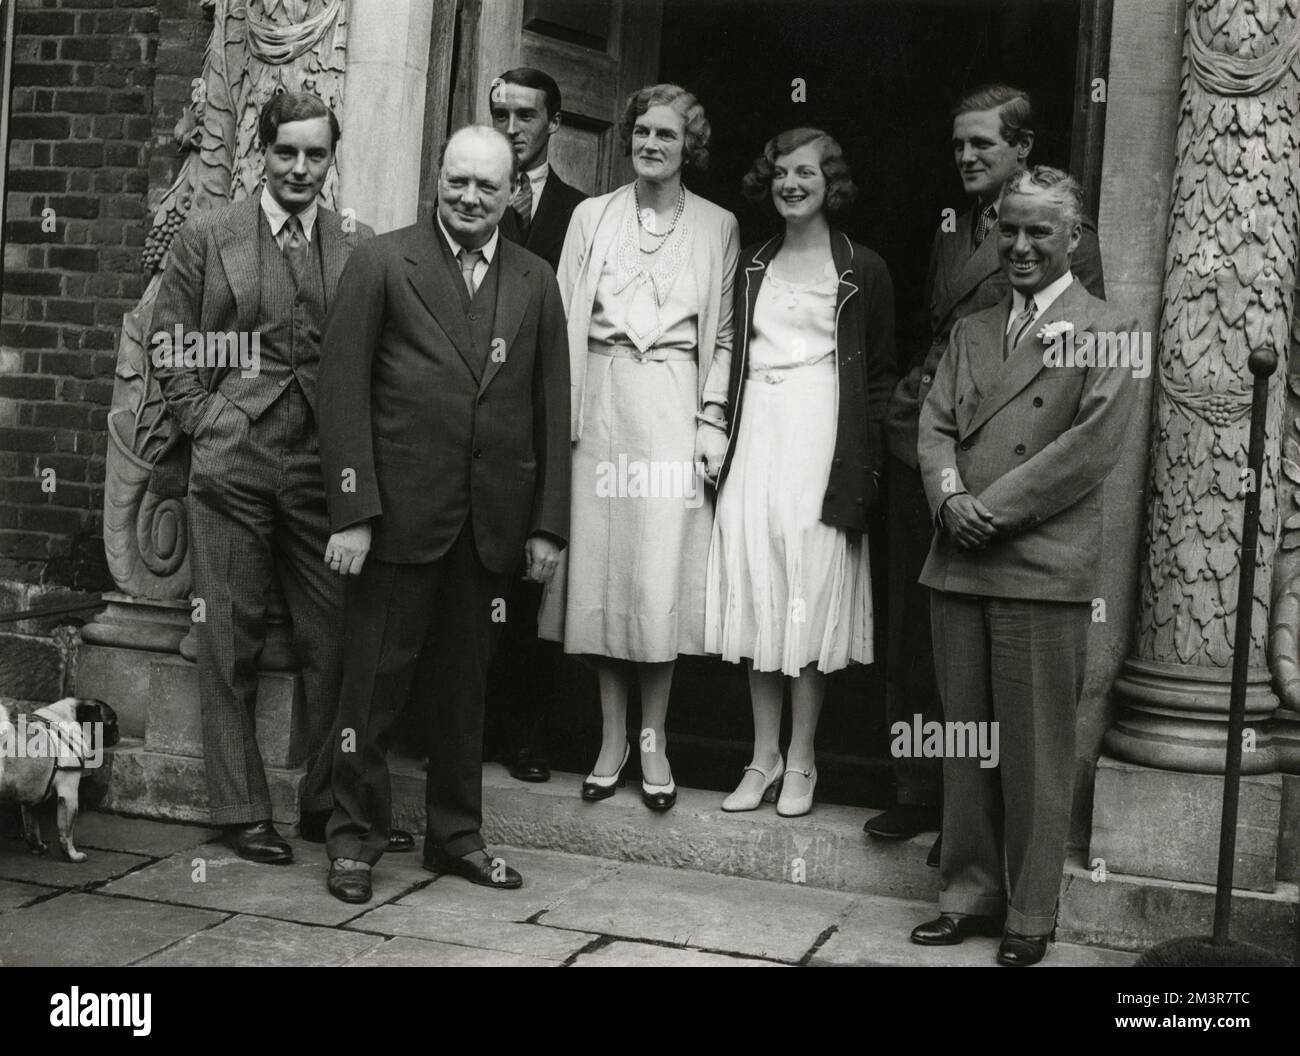 Charlie Chaplin was the guest of Mr and Mrs Winston Churchill at Chartwell, their Westerham, Kent, home for the weekend on 19th September 1931. The photo shows Charlie Chaplin (far right) with his hosts and their daughter (Diana, third from right) and son (Randolph, second from right) and other guests. Clementine Churchill is the central figure.     Date: 1931 Stock Photo